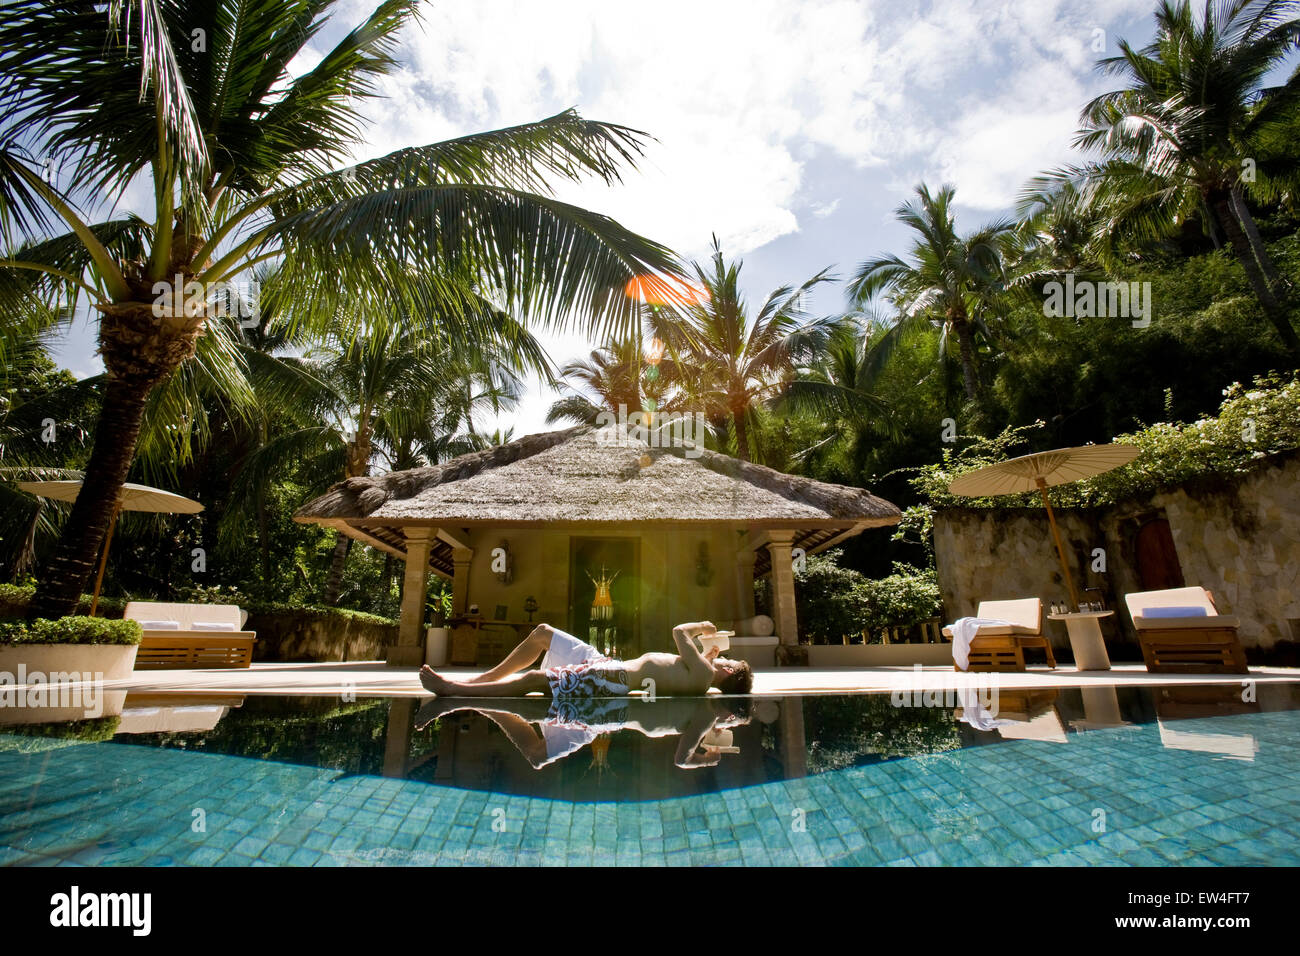 A man relaxing by the pool of his bungalow reading a book under a palm tree. Stock Photo